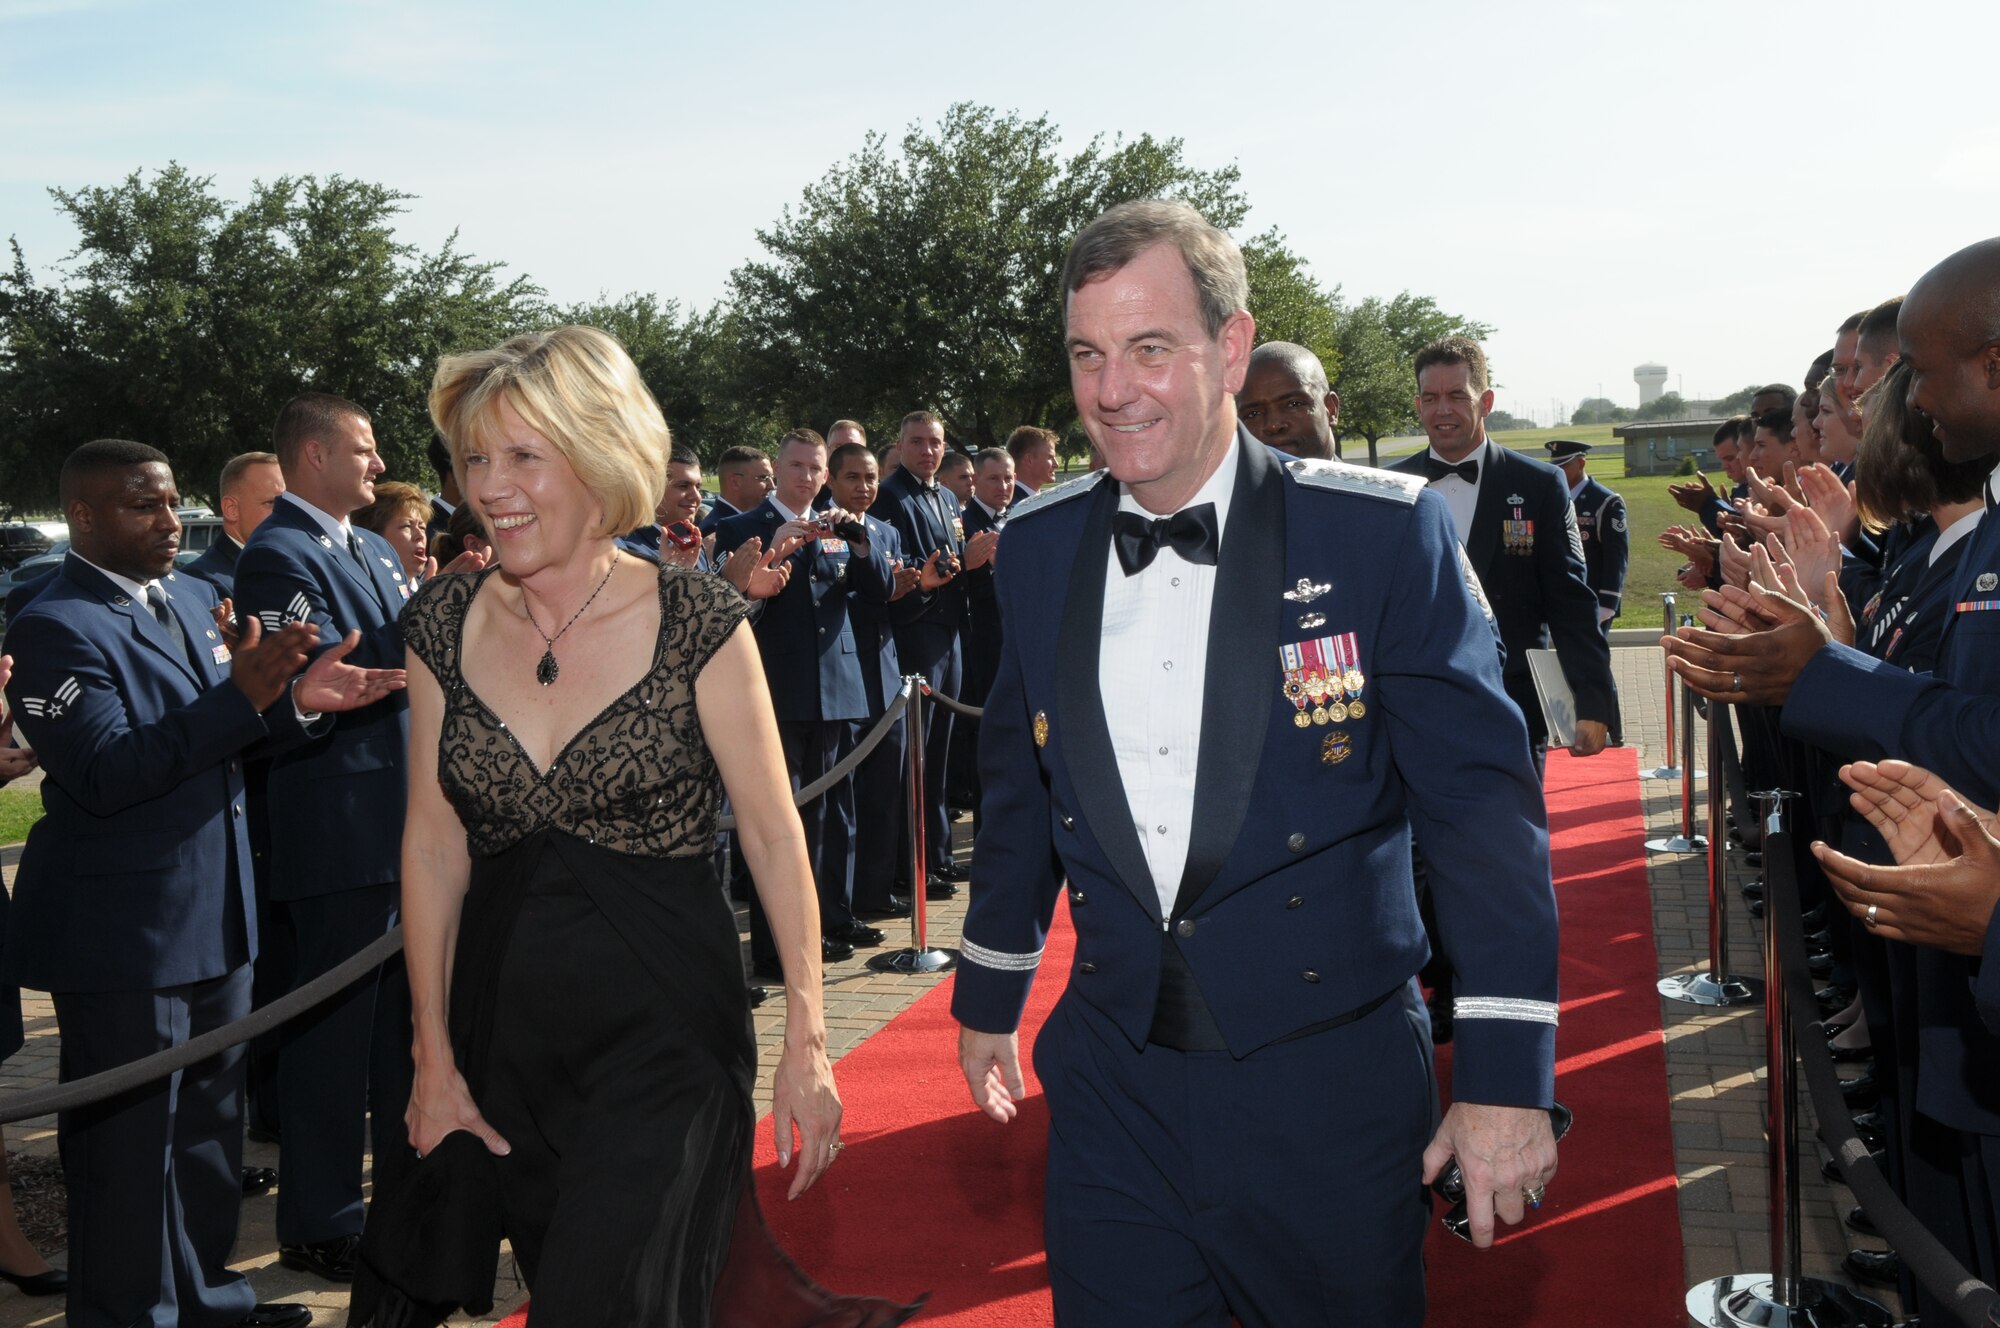 Gen. Stephen R. Lorenz, Commander, Air Education and Training Command and his wife,  Leslie, arrive at the Gateway Club on Lackland AFB, July 16 for his induction into the Order of the Sword. The Order of the Sword is the highest honor and tribute noncommissioned officers can bestow upon an individual. General Lorenz is the sixth leader AETC Airmen have chosen to recognize by presenting the sword. (U.S. Air Force photo/Joel Martinez)